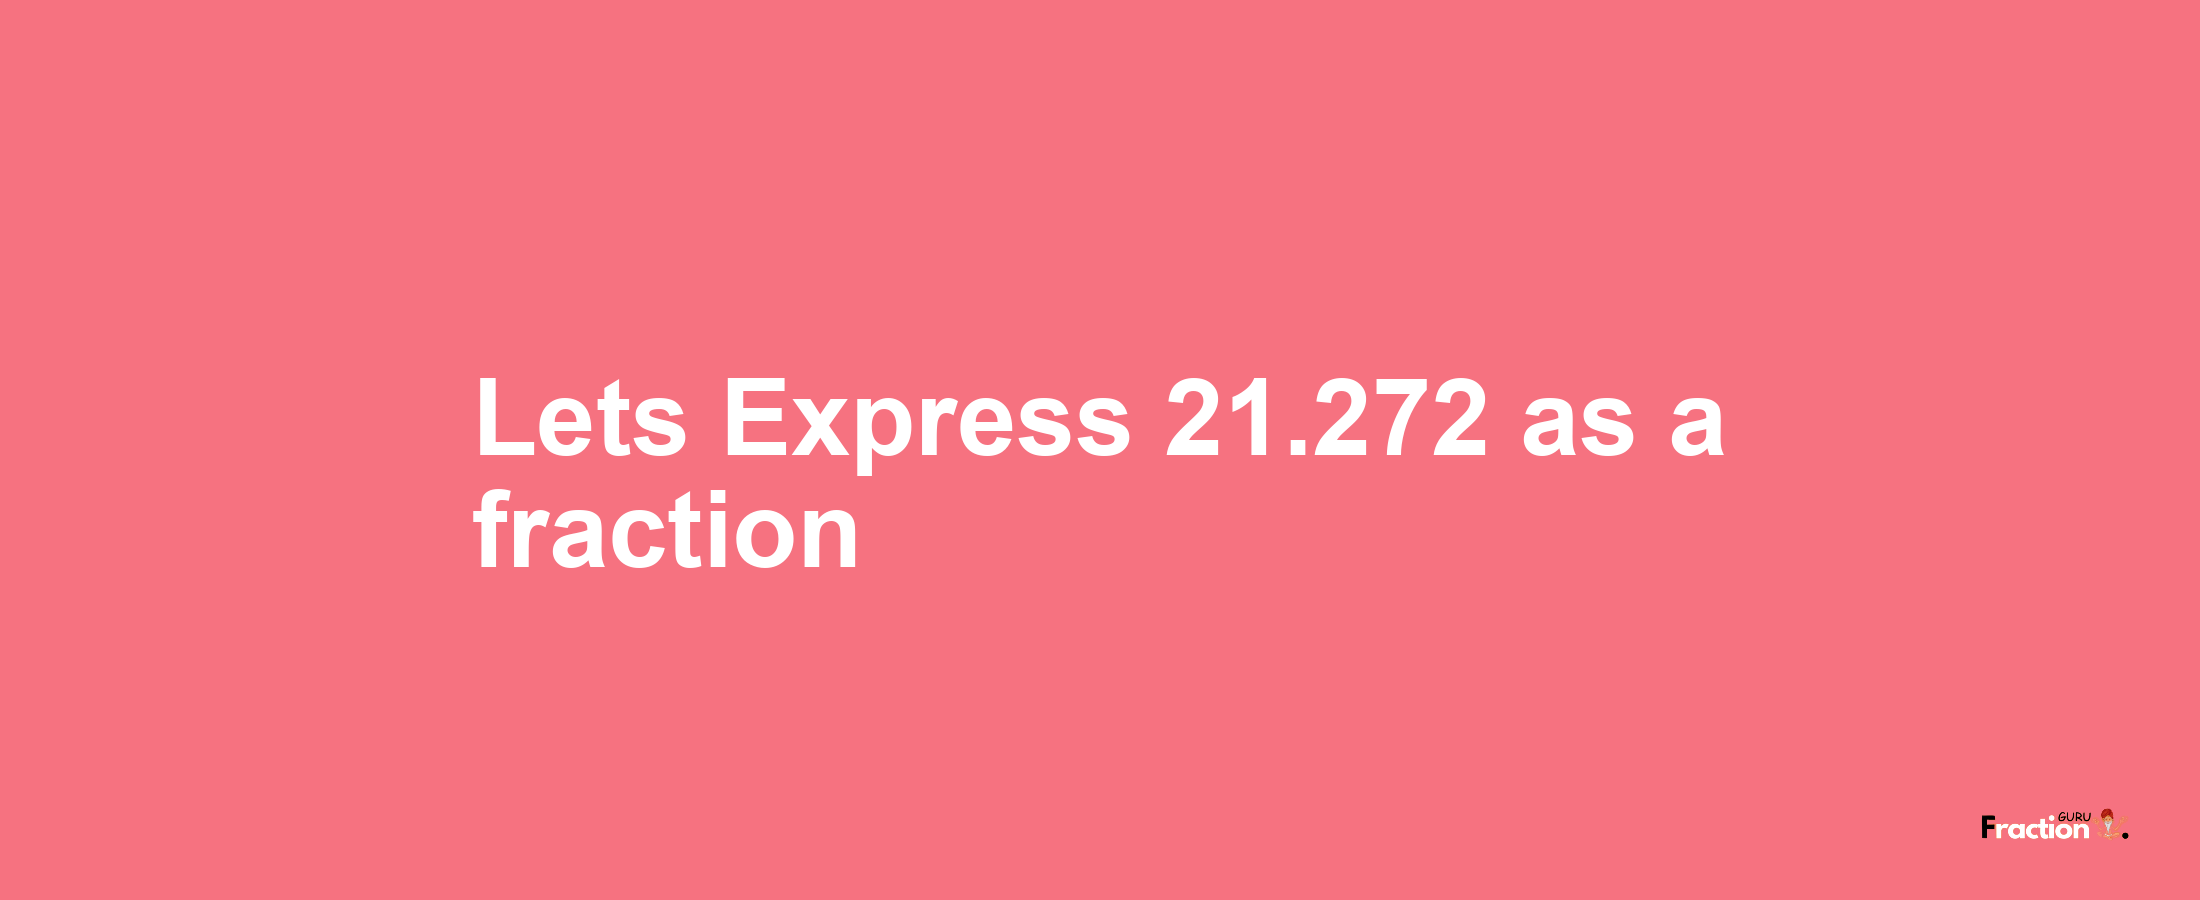 Lets Express 21.272 as afraction